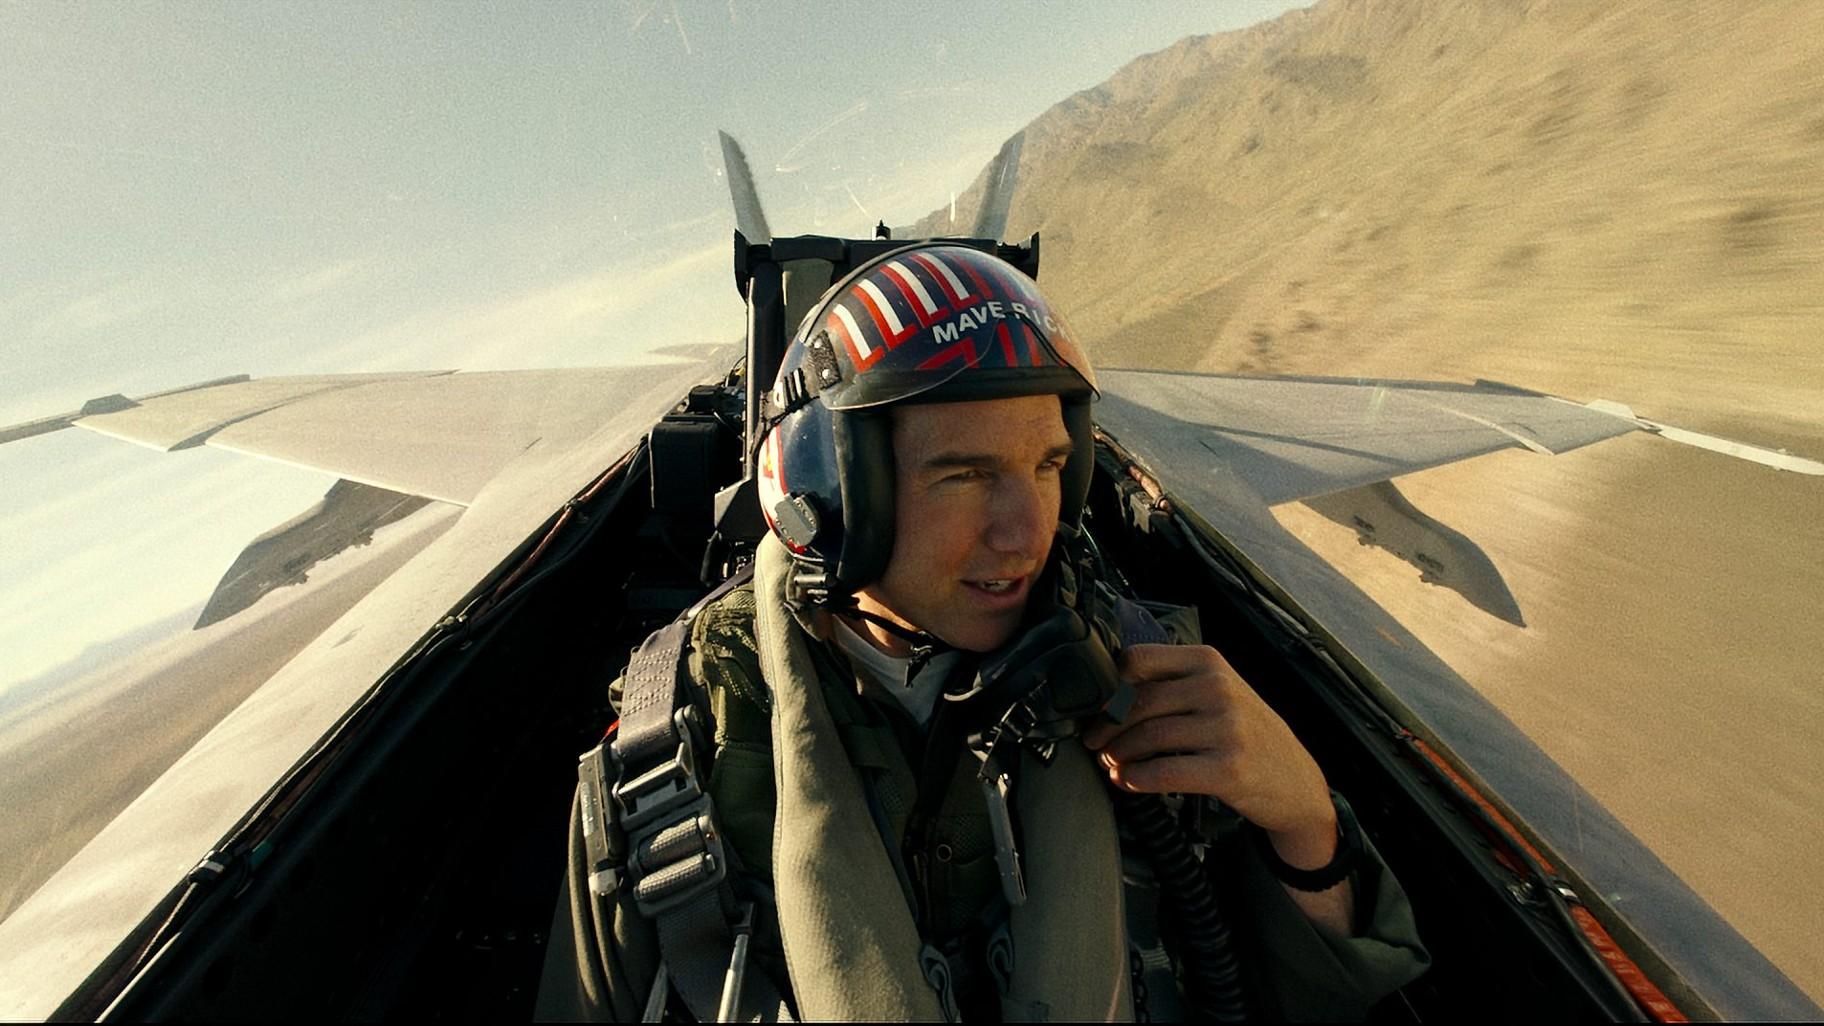 Tom Cruise in “Top Gun: Maverick,” to hit the outdoor screen in Millennium Park in summer 2023. (Courtesy of Skydance Media)